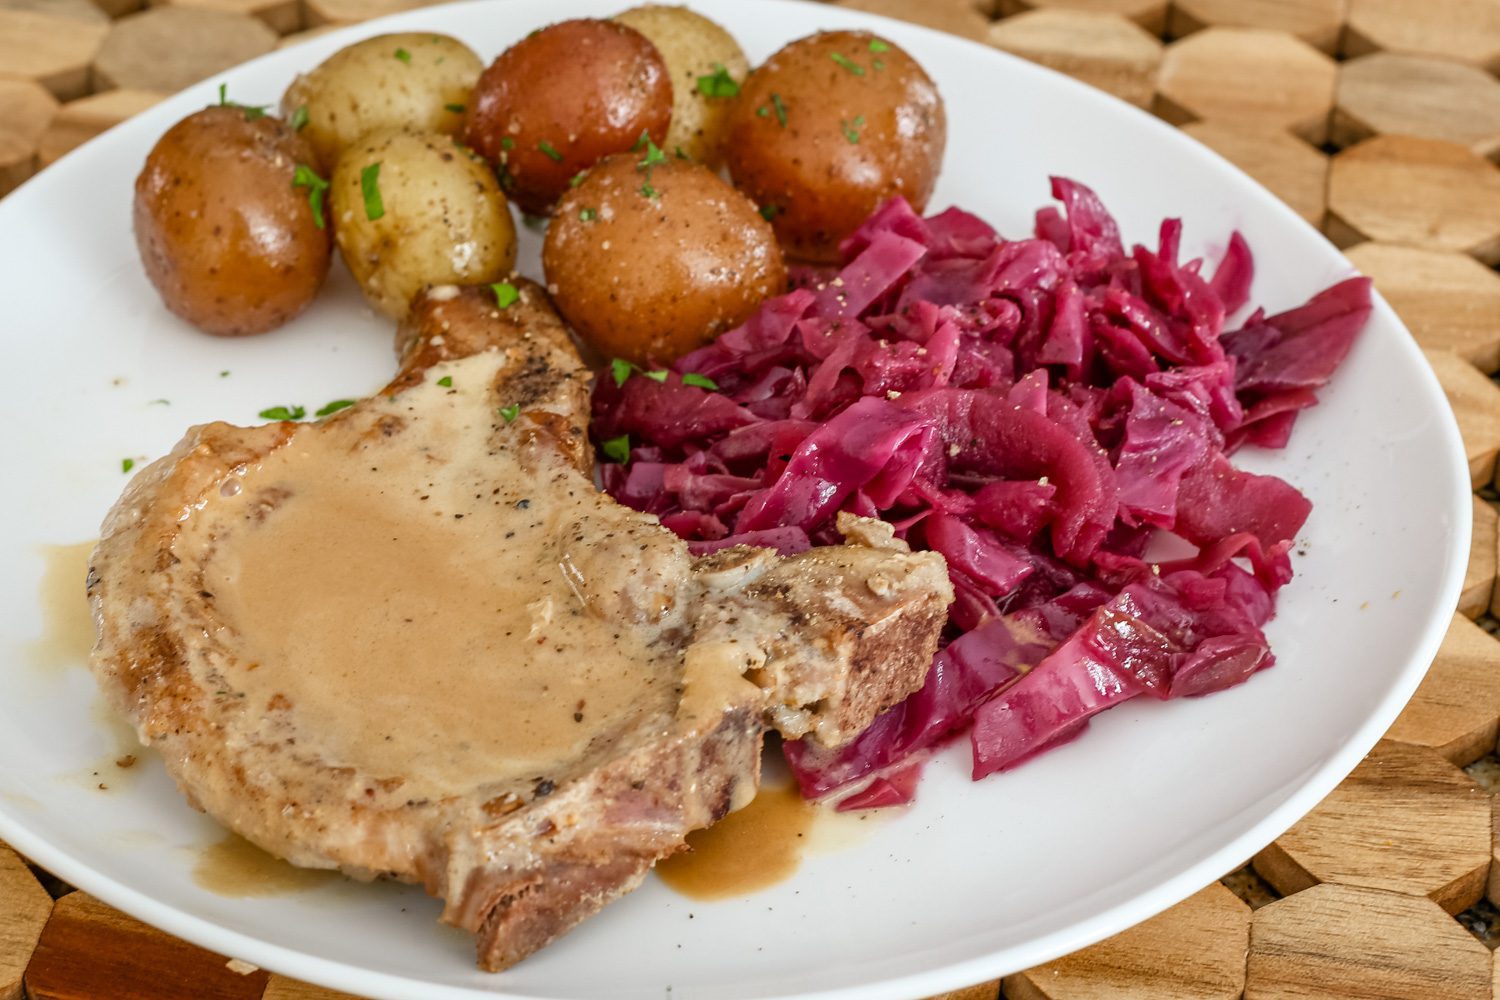 braised red cabbage is shown with a pork chop and baby potatoes on a plate